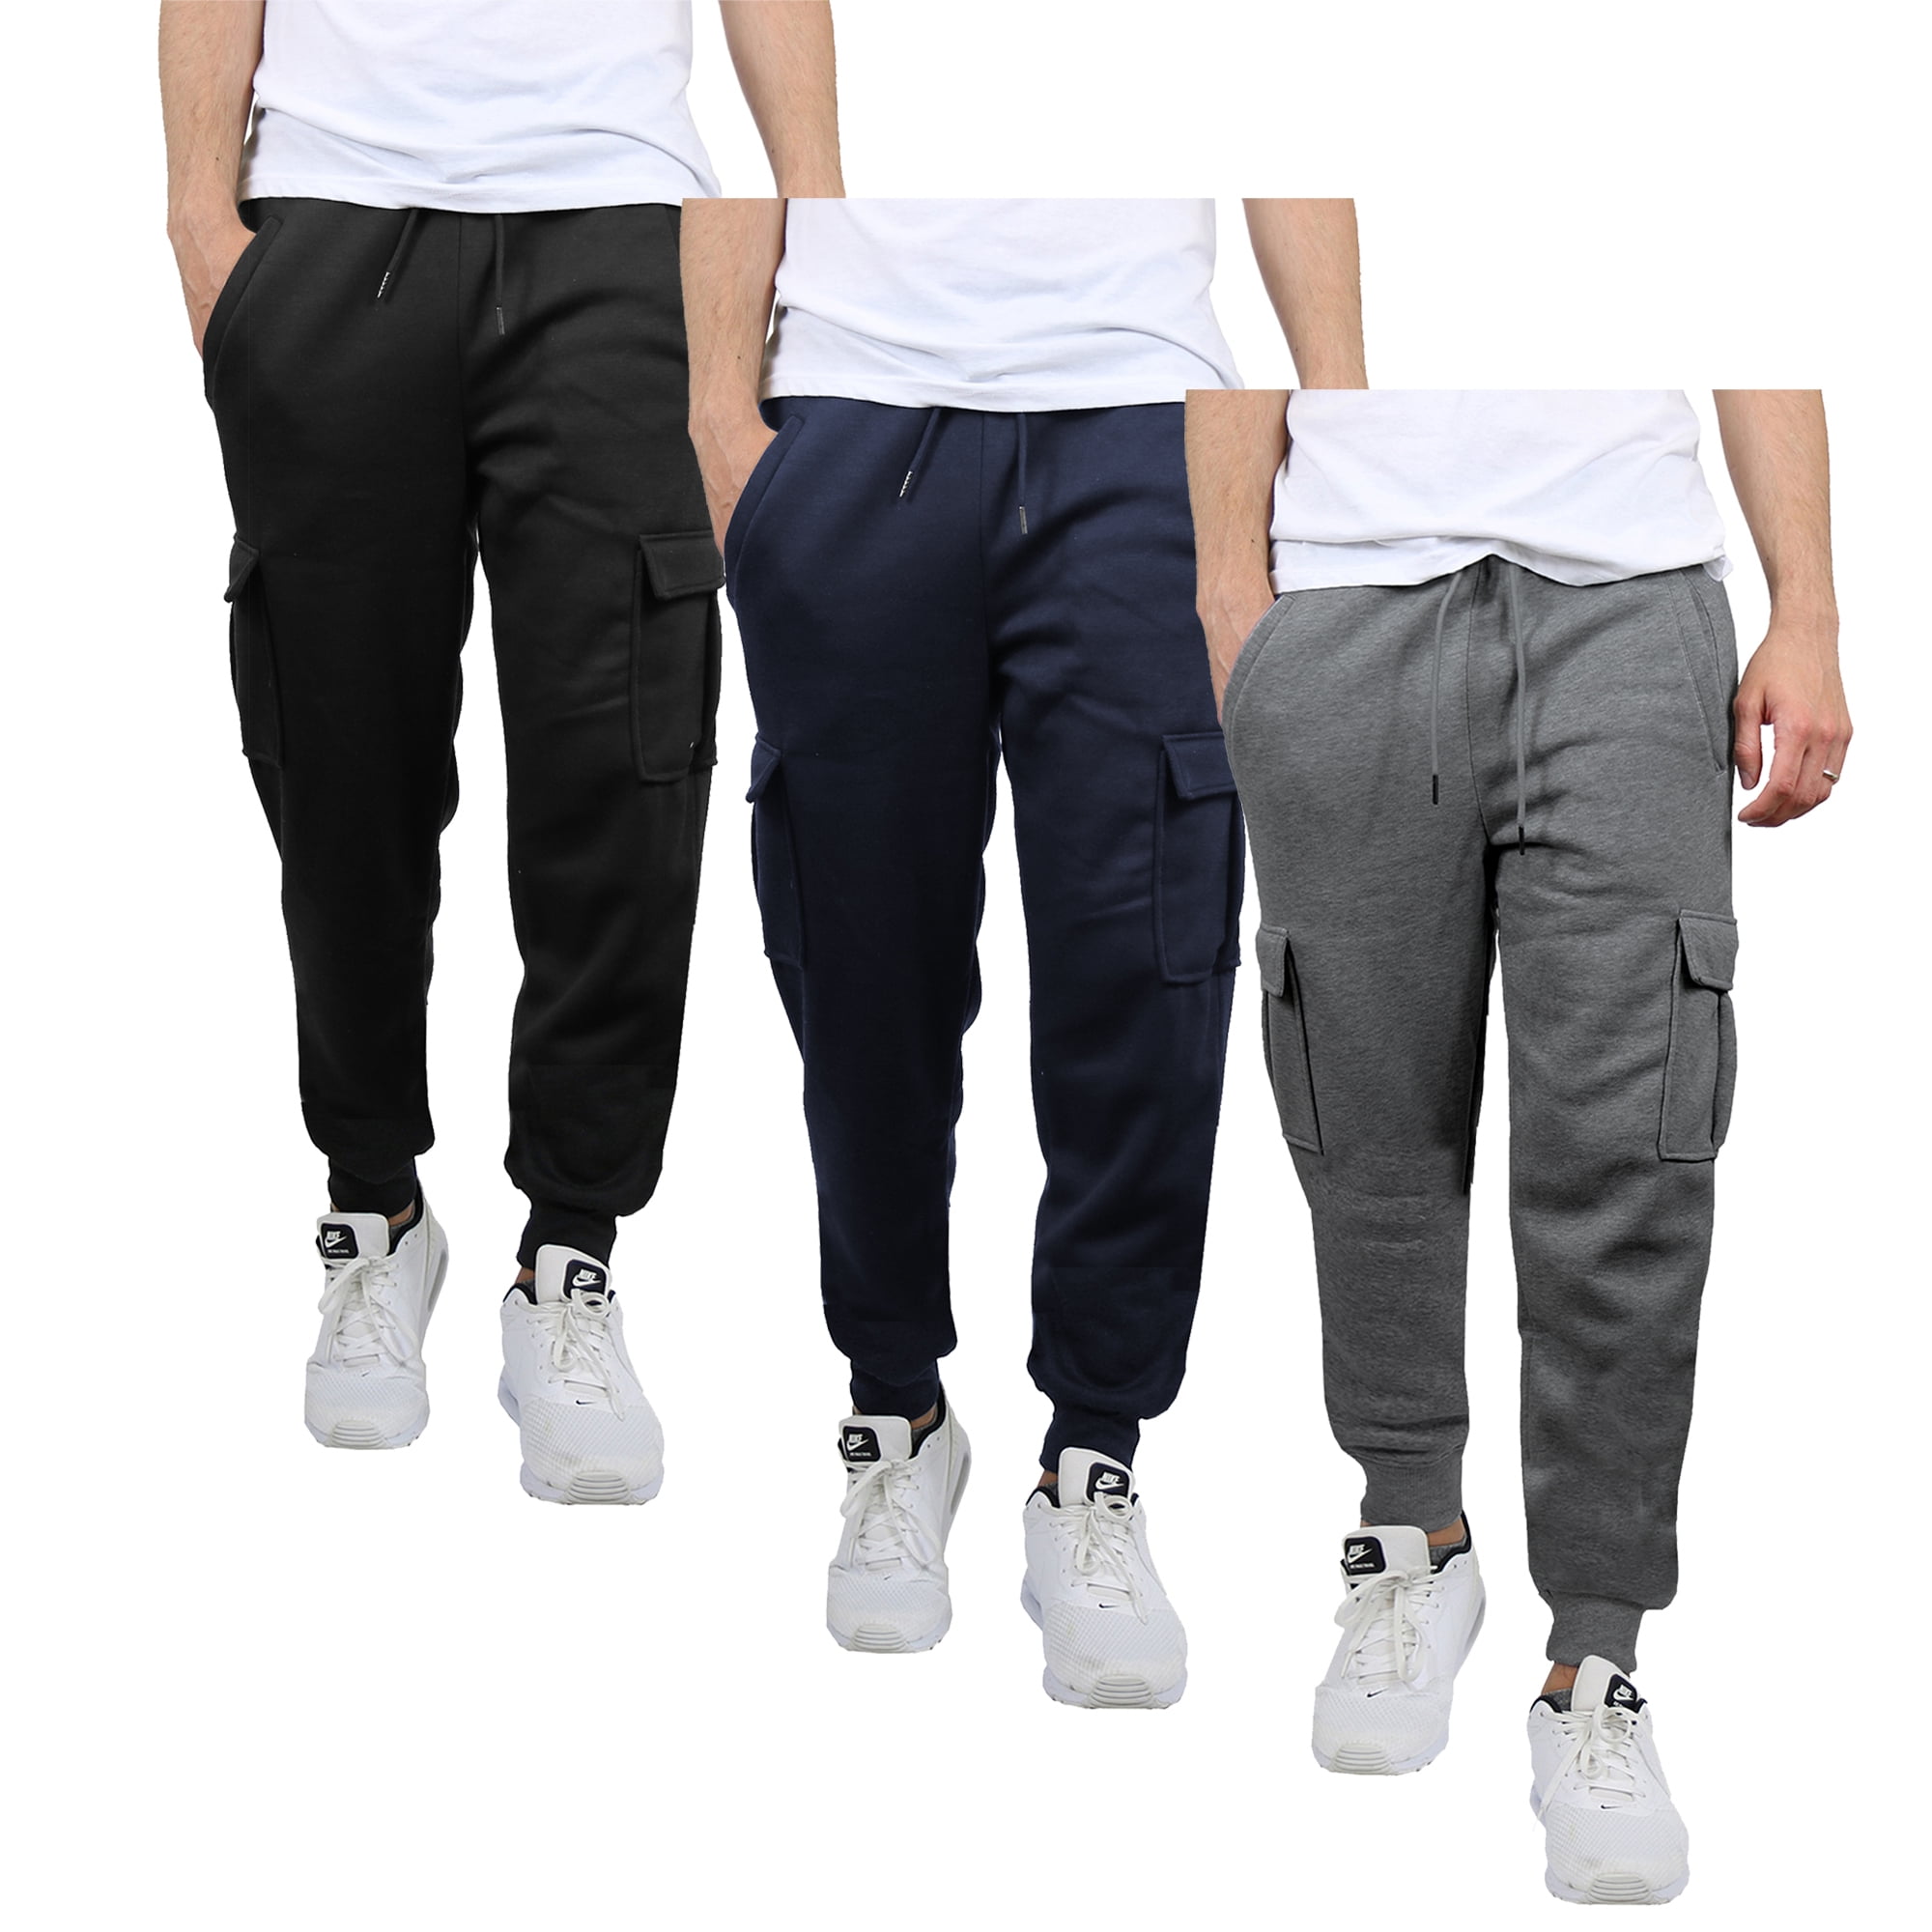 Galaxy by Harvic 3-Pack Mens Slim Fit Fleece Jogger Sweatpants (S-2XL ...